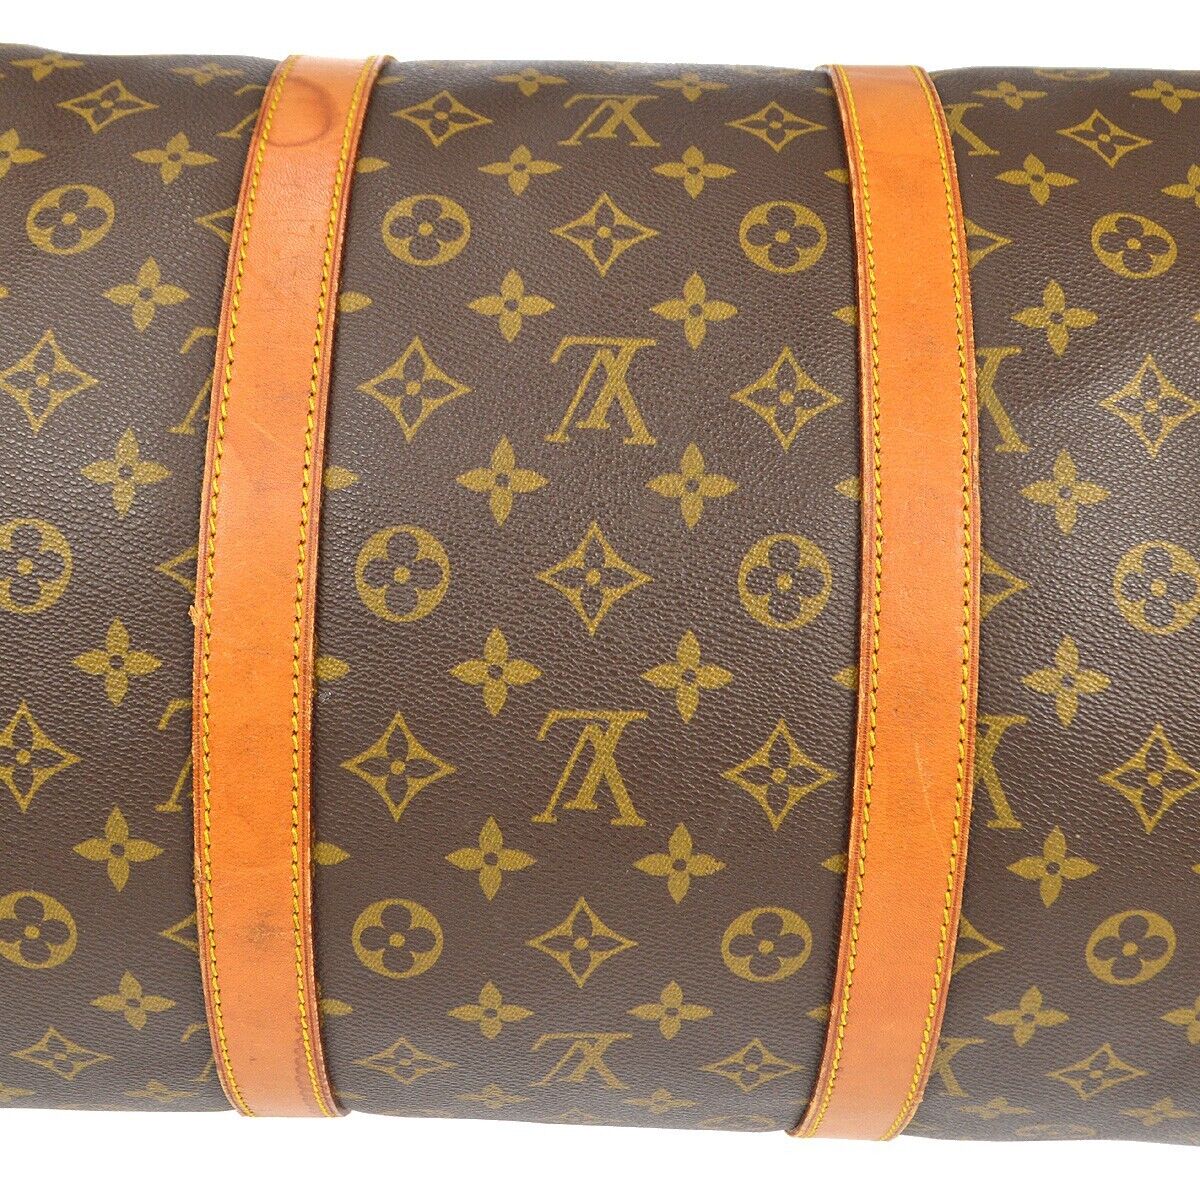 SOLD. Louis Vuitton: A vintage Keepall 55 travel bag of brown